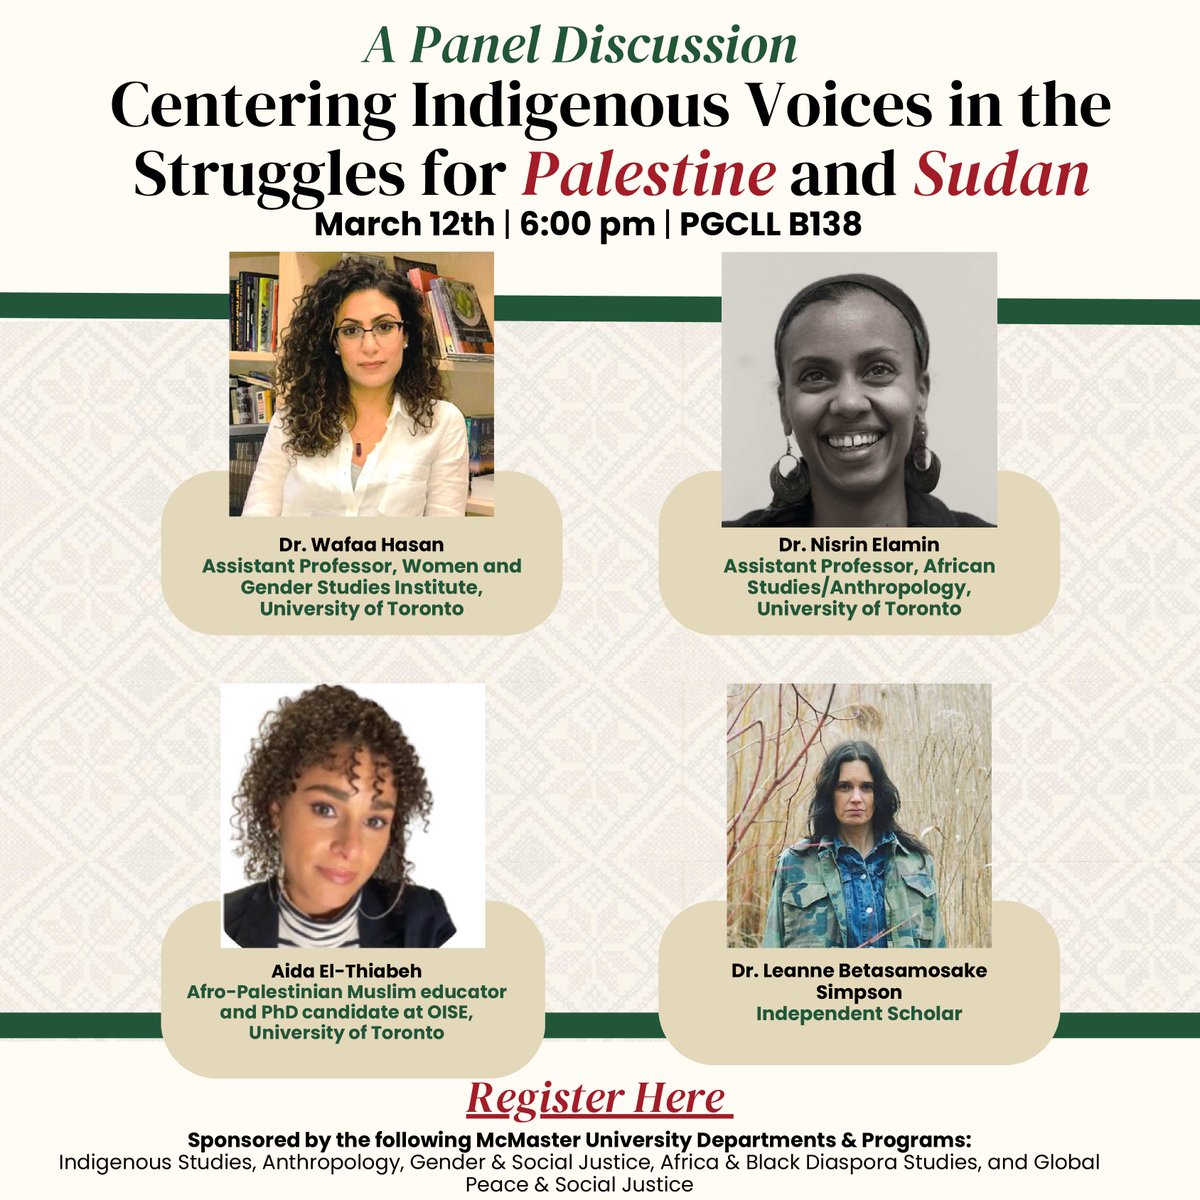 Come join this panel discussion 'Centering Indigenous Voices in the Struggles for Palestine and Sudan' with Aida El-Thiabeh, and Dr. Wafaa Hasan, Dr. Nisrin Elamin and Dr. Leanne Betasamosake Simpson on March 12 | 6:00pm @ PGCLL B138 Register here - tinyurl.com/43tbr65v